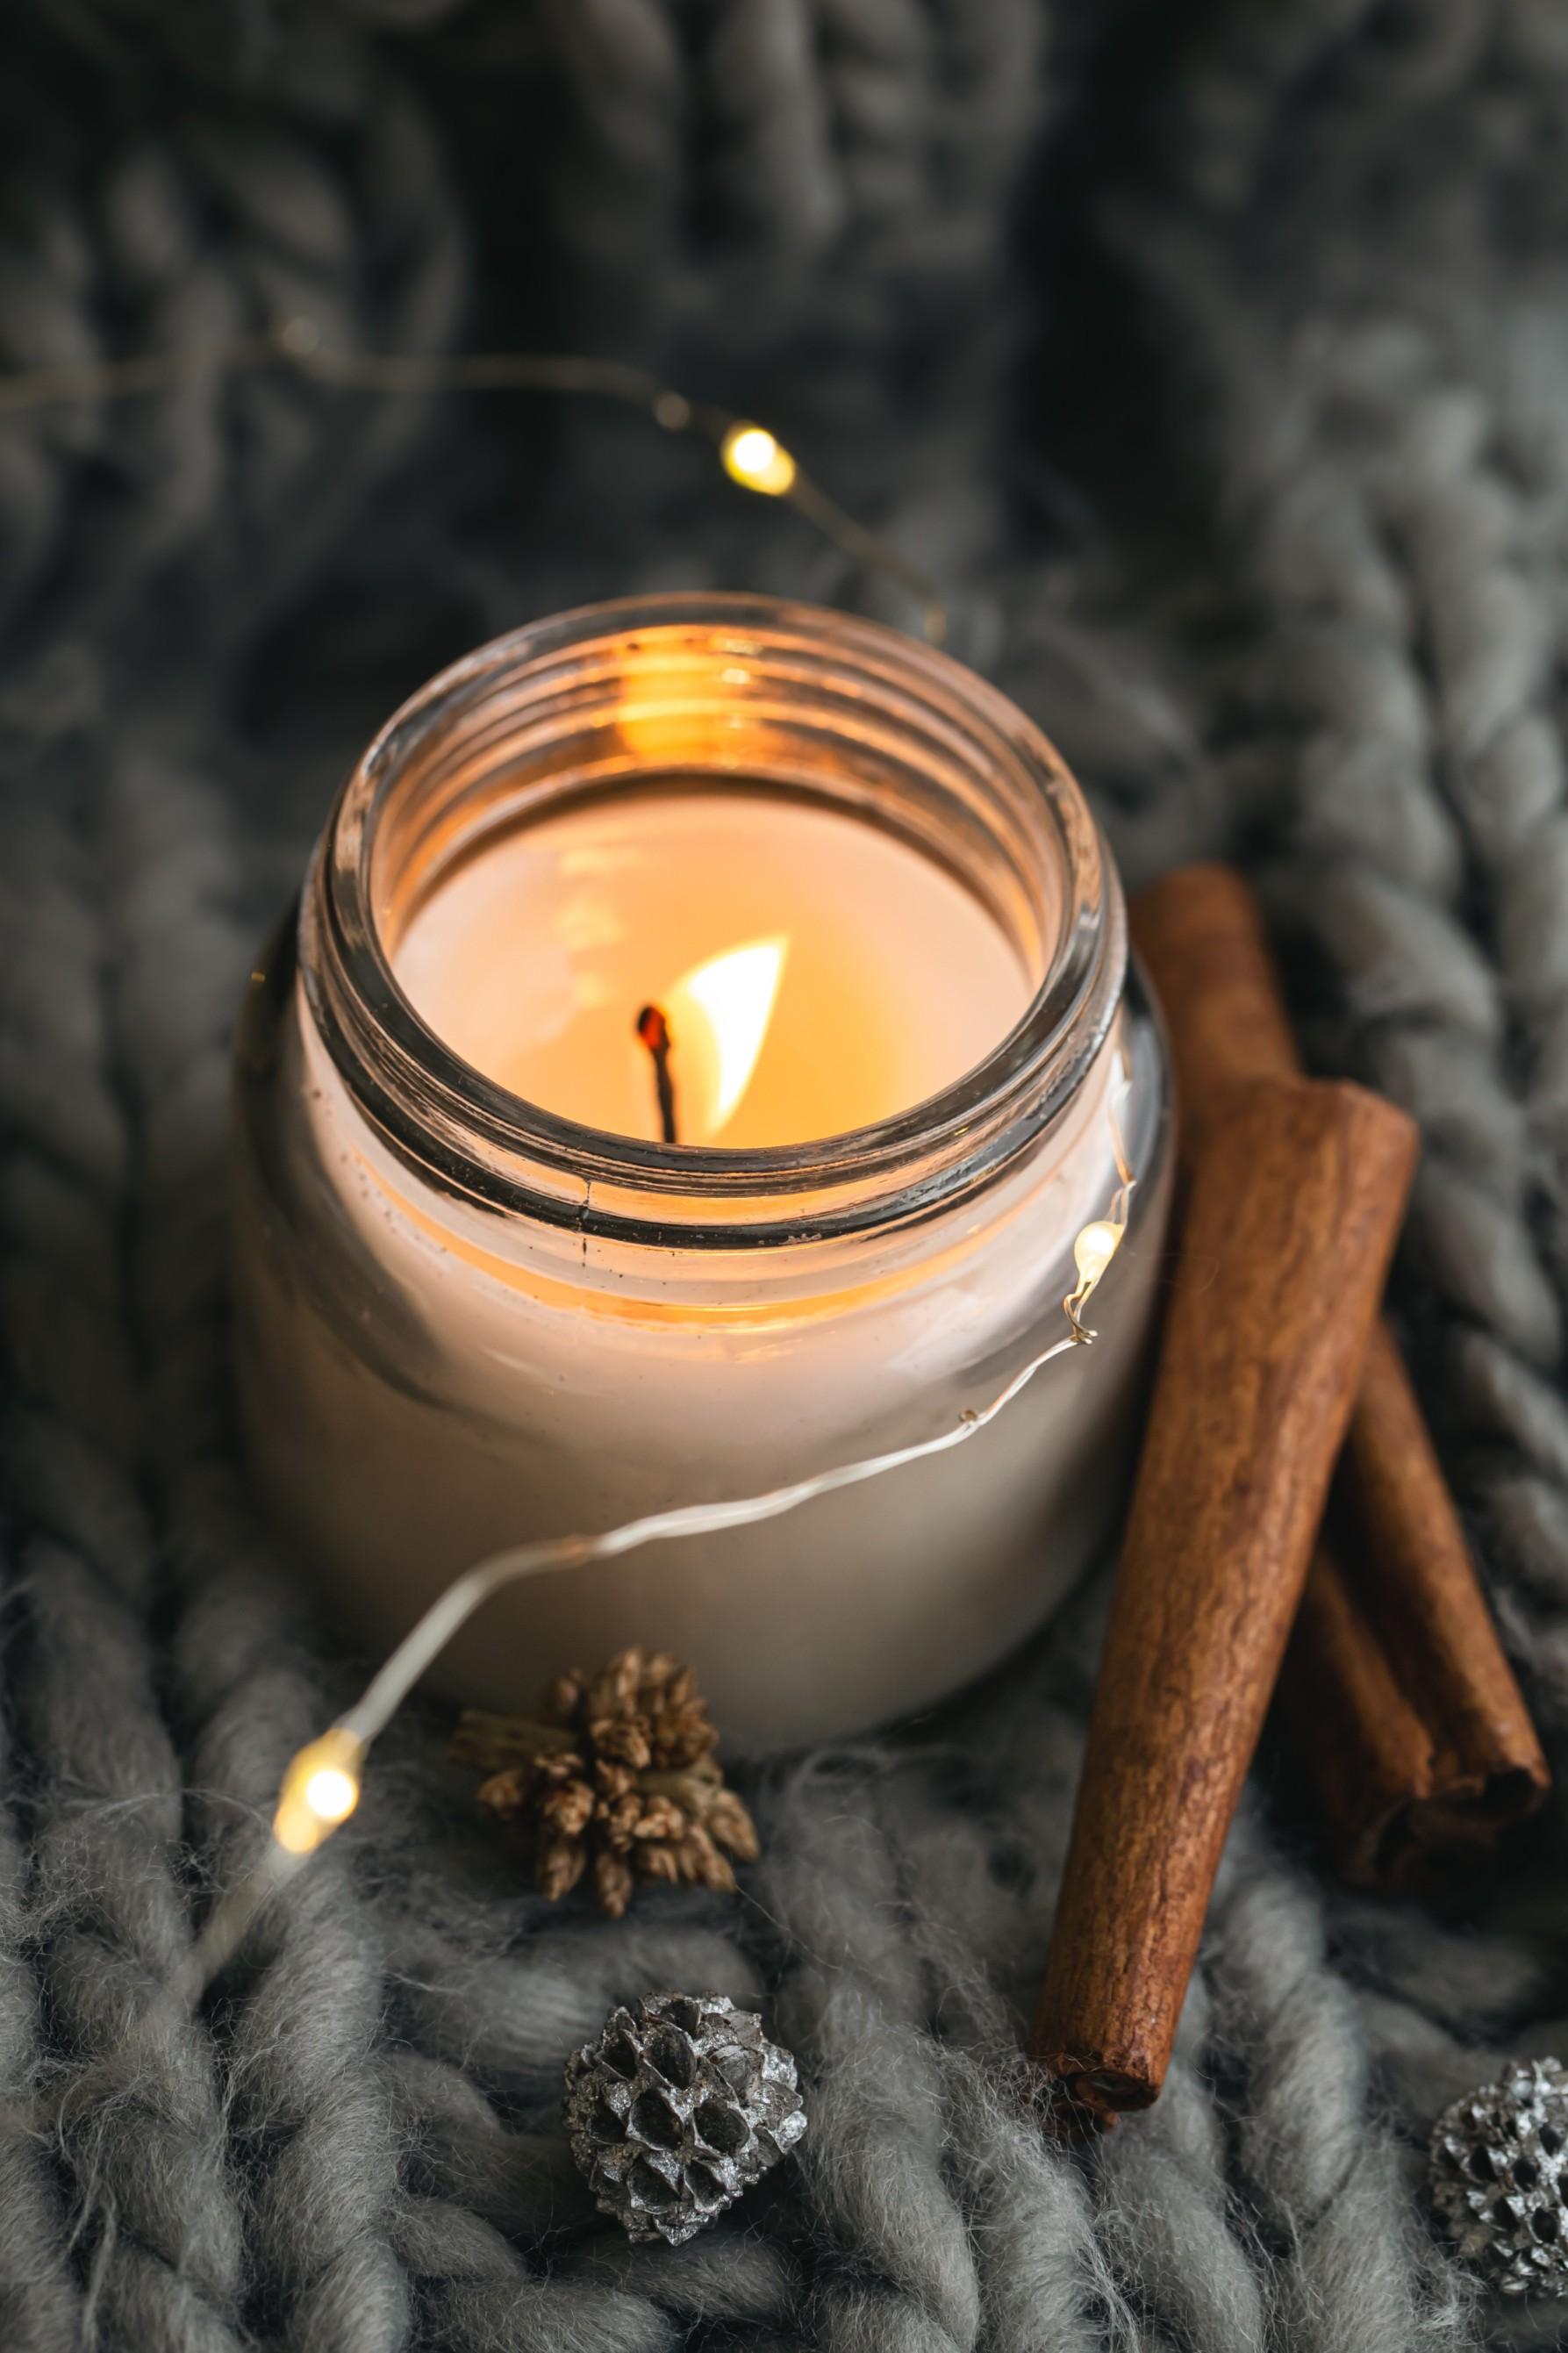 closeup-candle-cinnamon-sticks-background-gray-knitted-element (1) (1).jpg